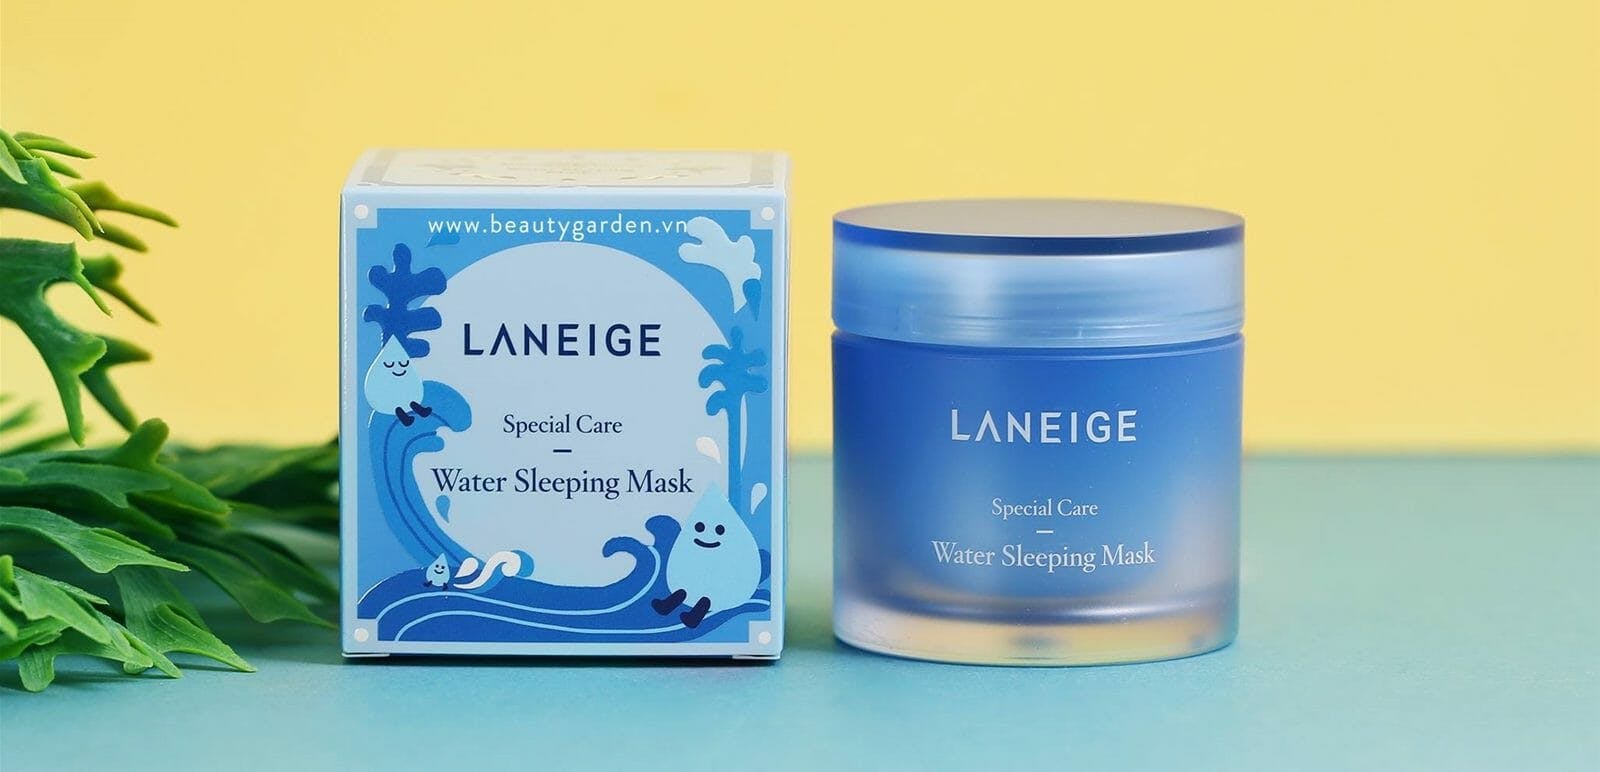 Sleep masks are the final step in the Korean skincare routine